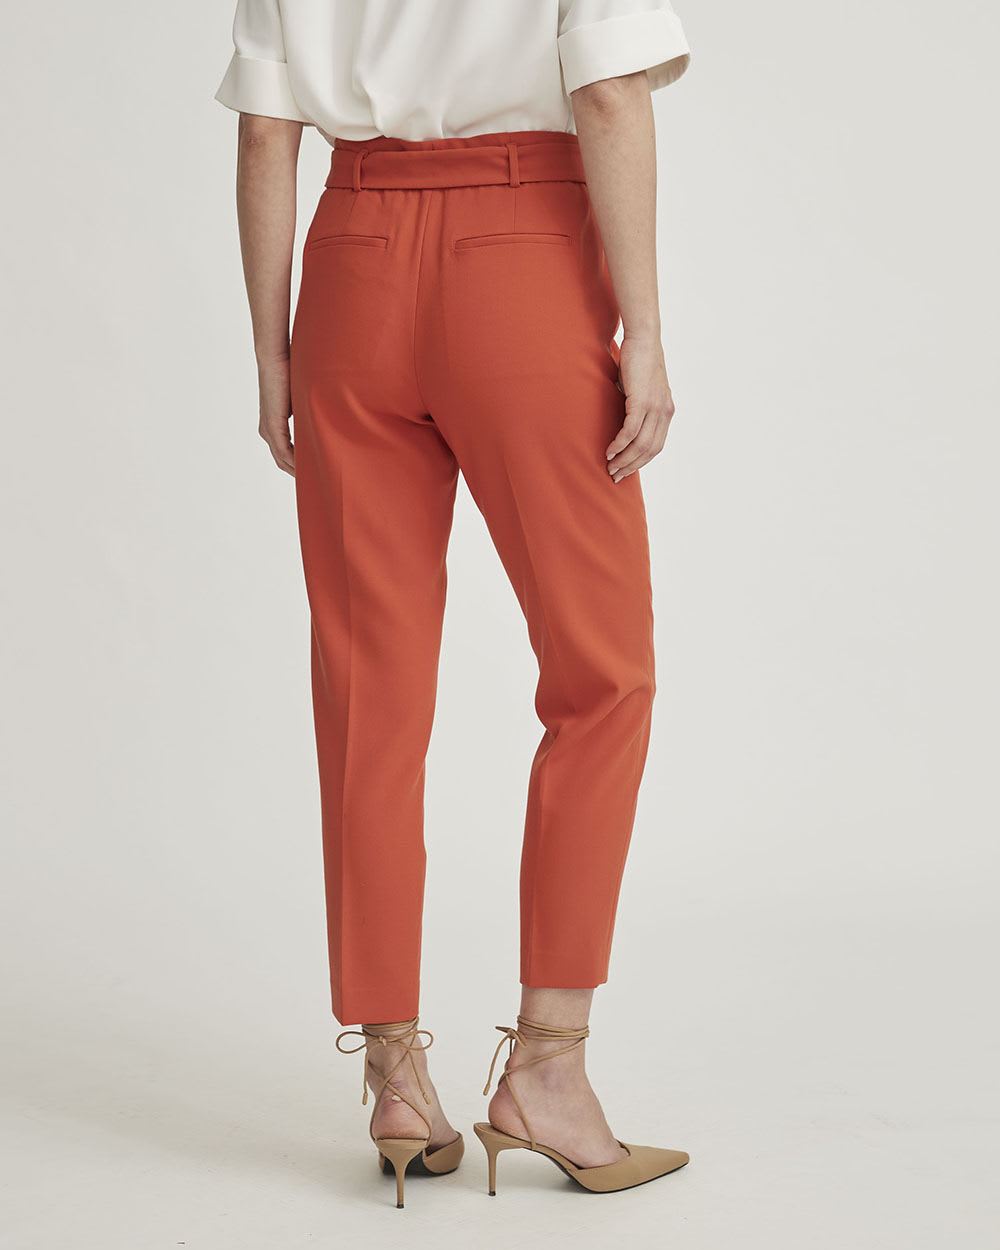 Burnt Orange High-Waist Tapered Ankle Pant with Belt - 28"